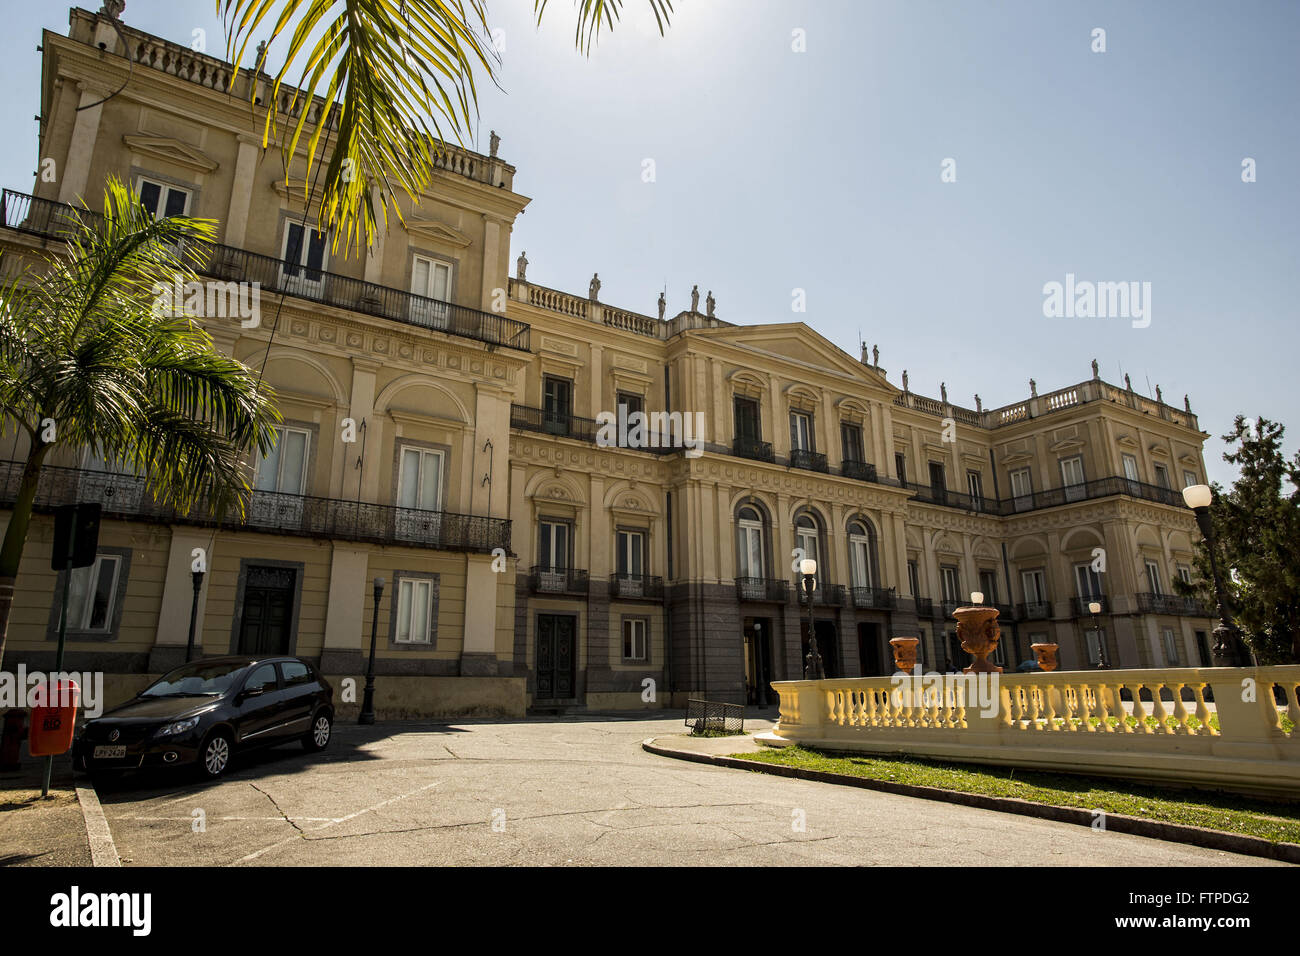 National Museum / UFRJ - residence of the royal / imperial family from 1808 to 1889 in Boa Vista Stock Photo